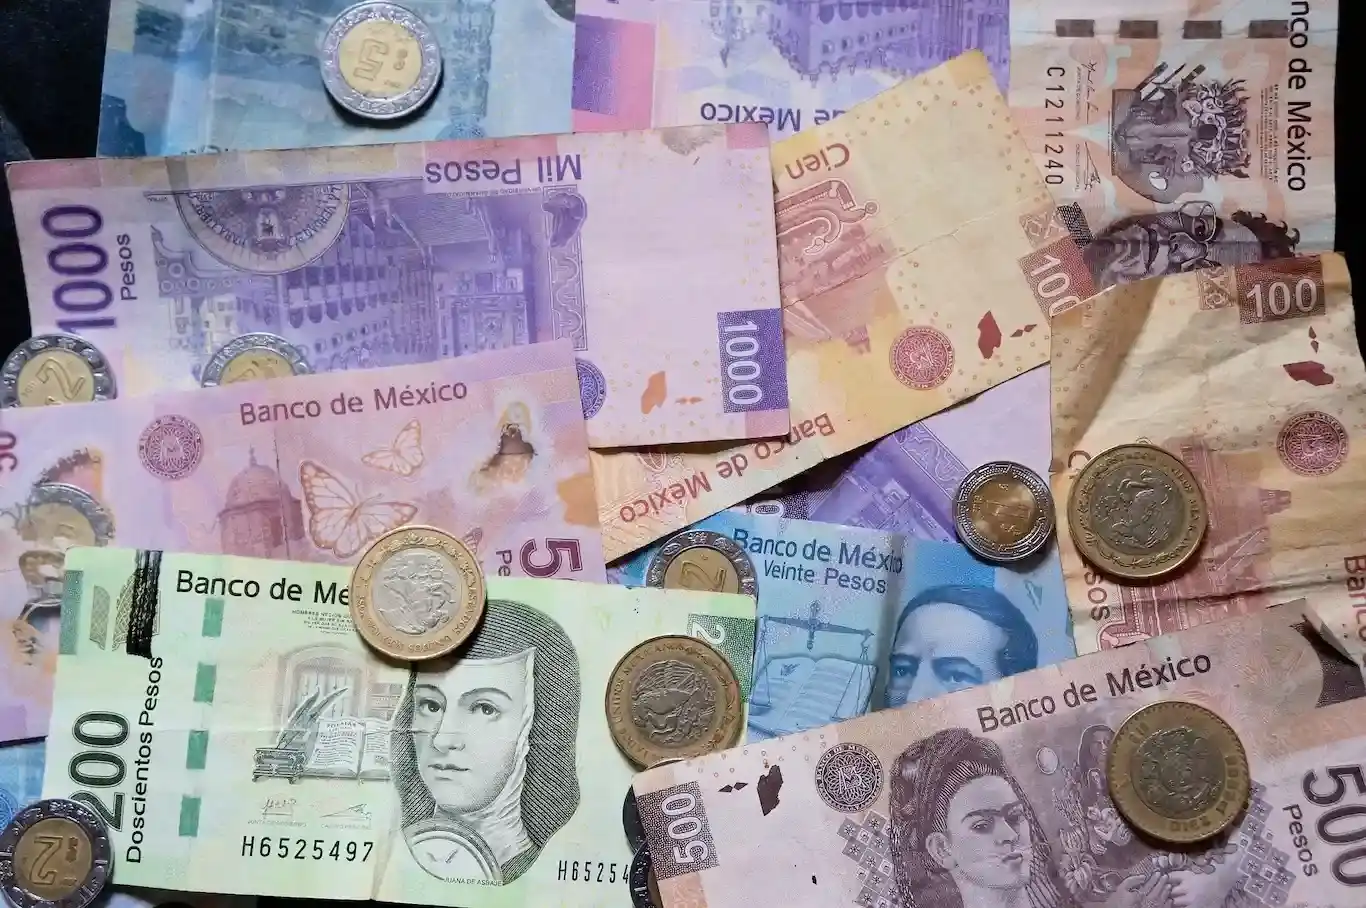 A pile of Mexican pesos, bills and coins.